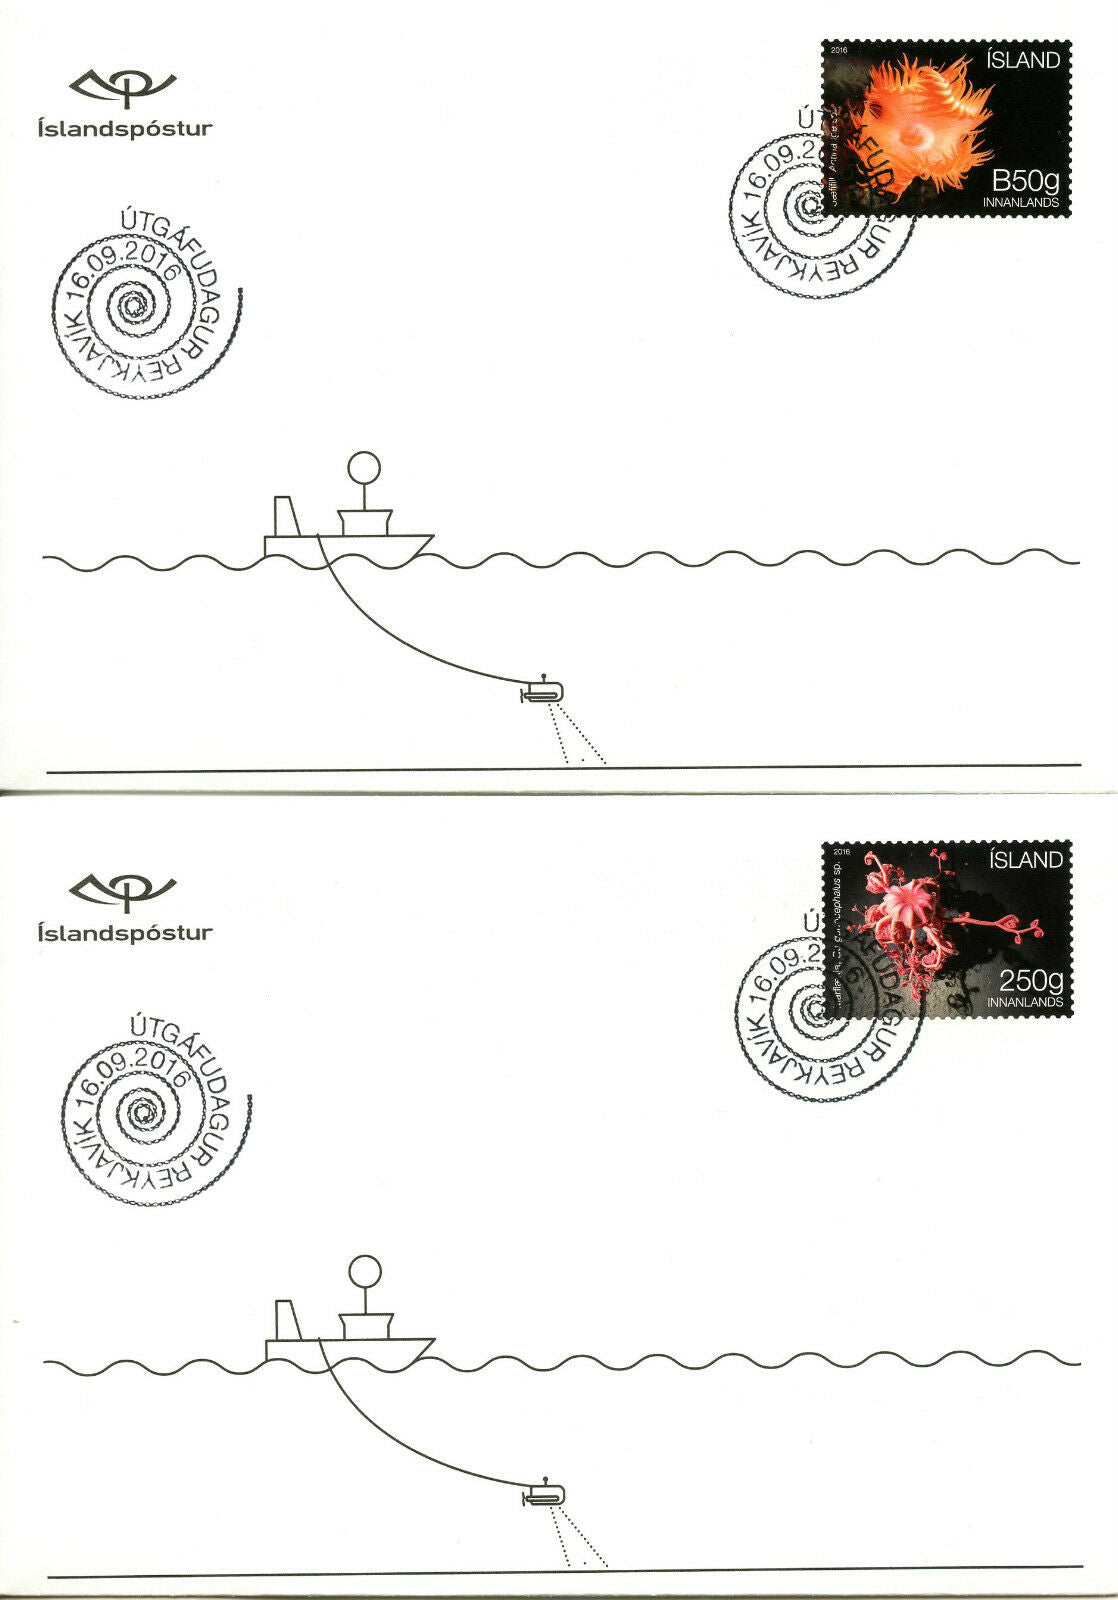 Iceland 2016 FDC Seabed Ecosystem 2v on 2 Covers Sea Anemones Basket Star Stamps